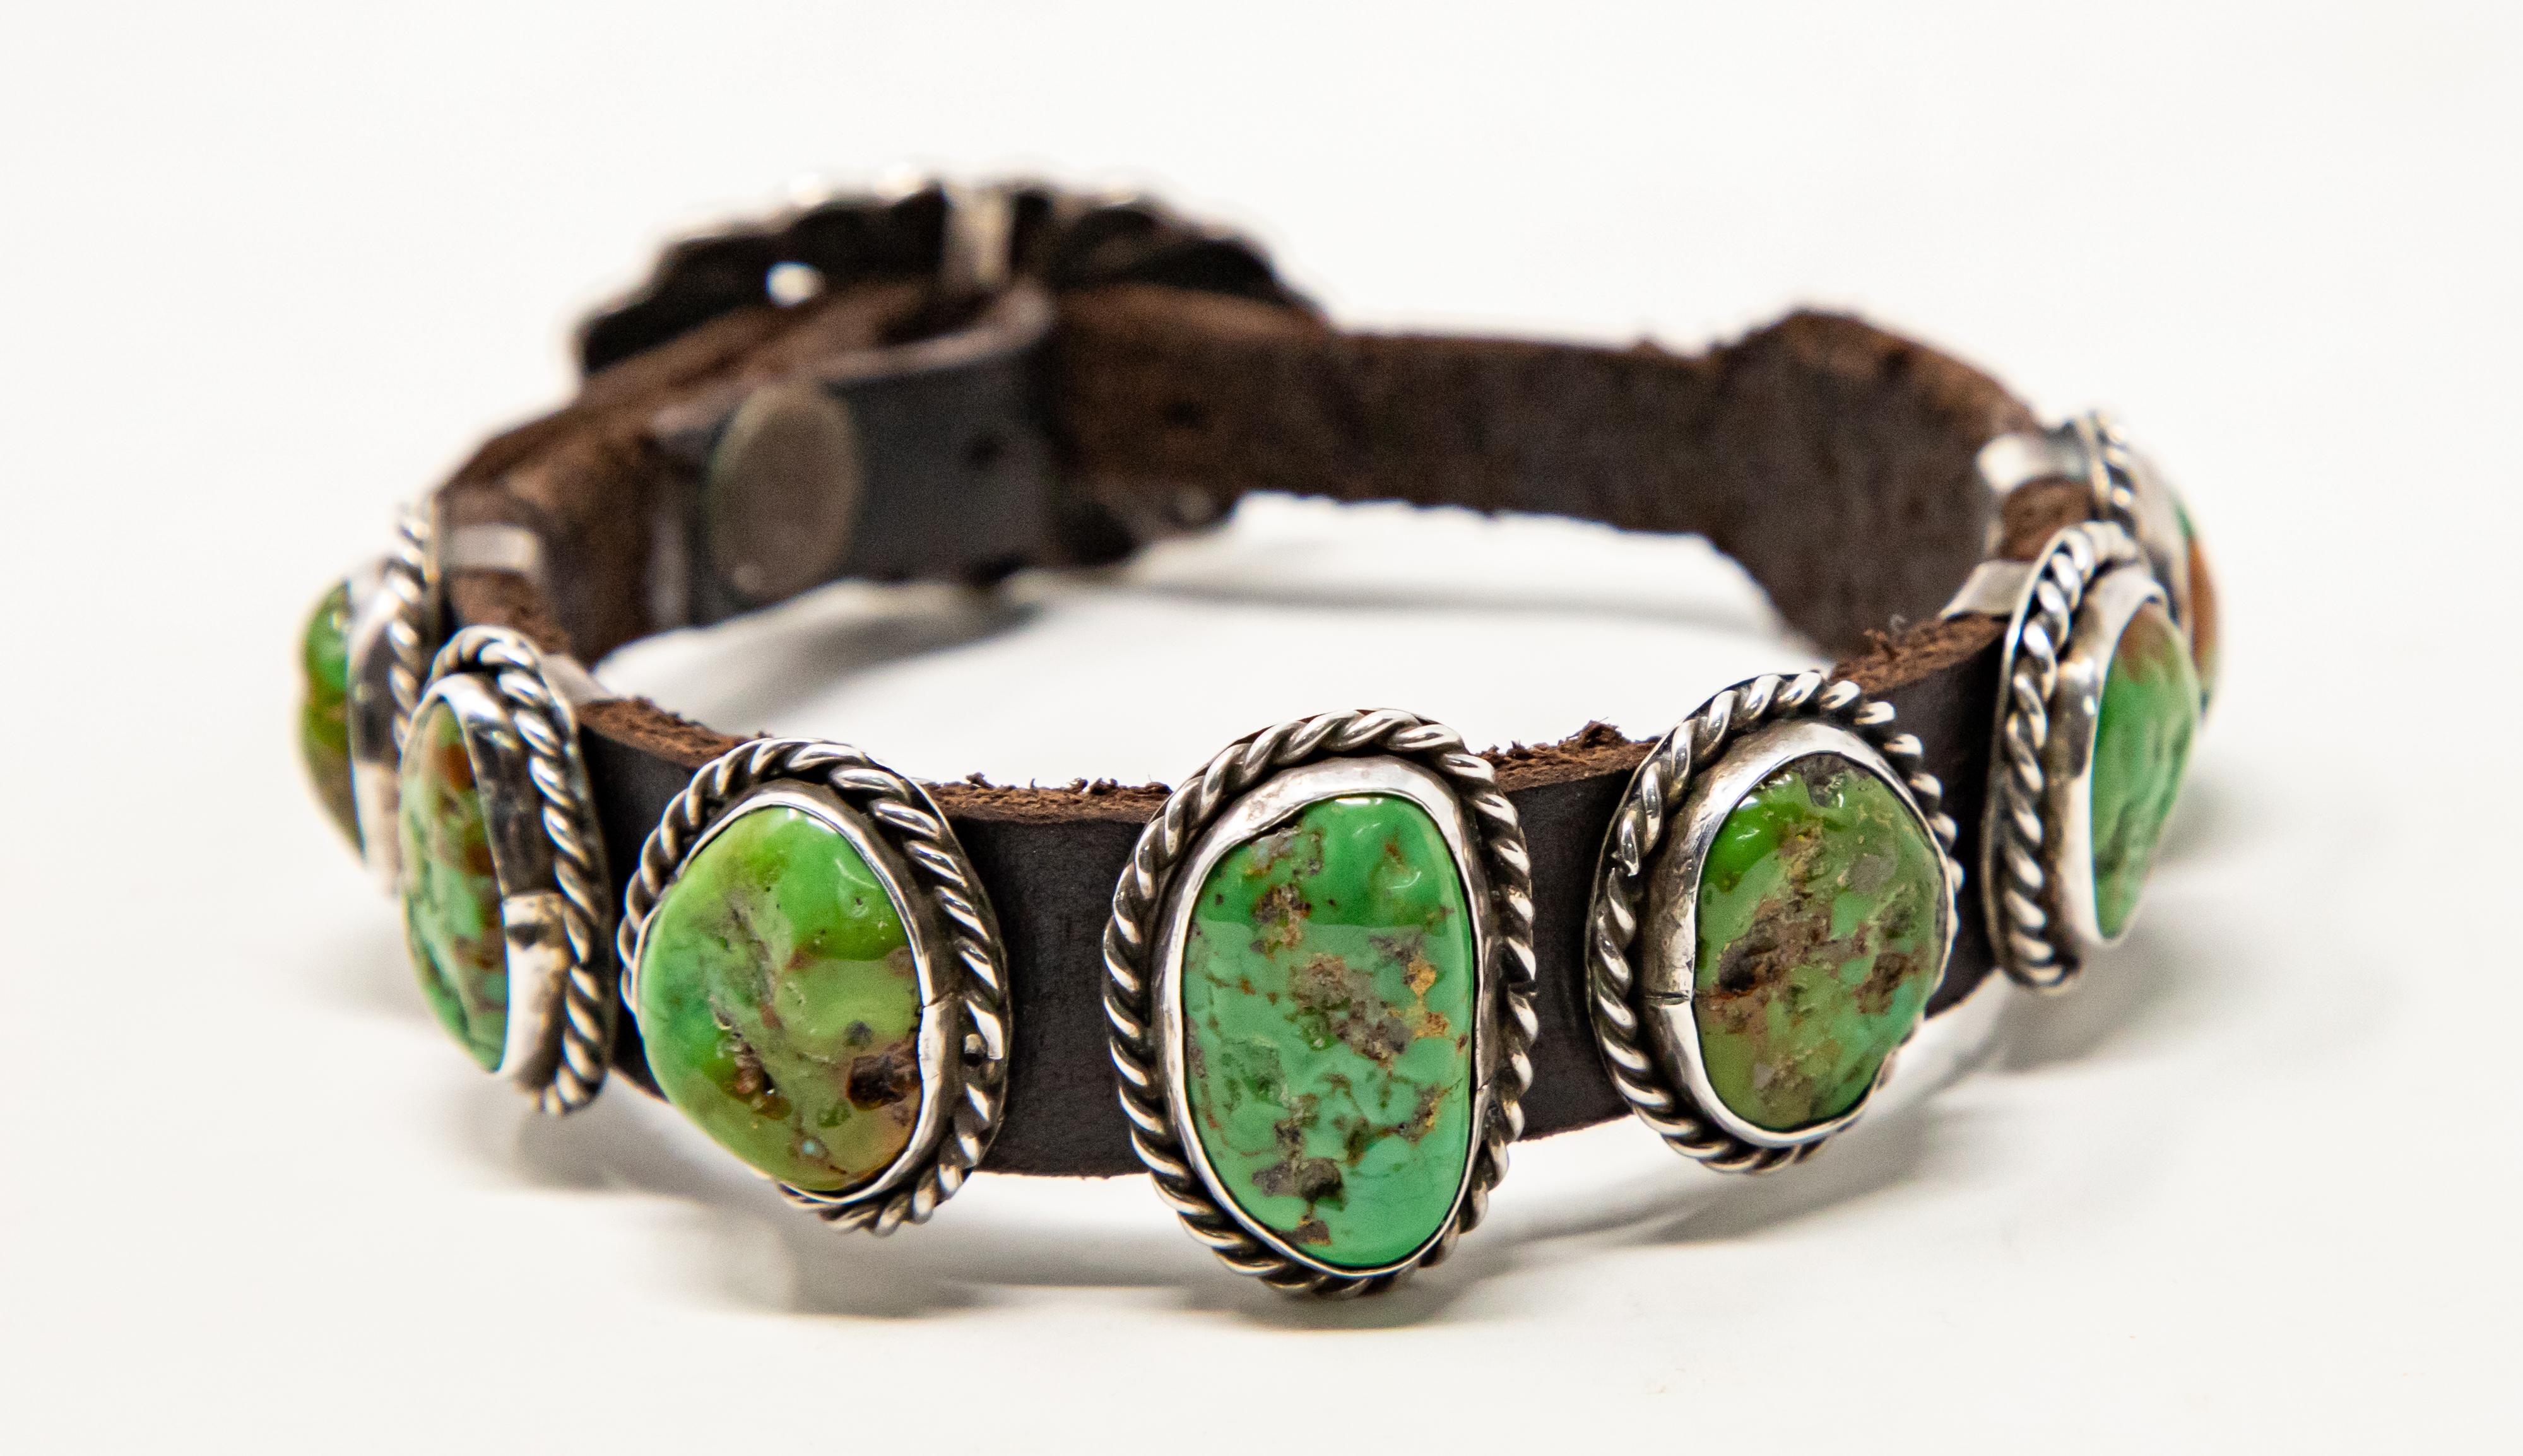 This stunning bracelet is up for your consideration. Having seven turquoise pieces set in sterling silver and banded to leather. Has a buckle that is sunburst with rounded tips. Hallmarked Sterling, DM on the back of the center stone.